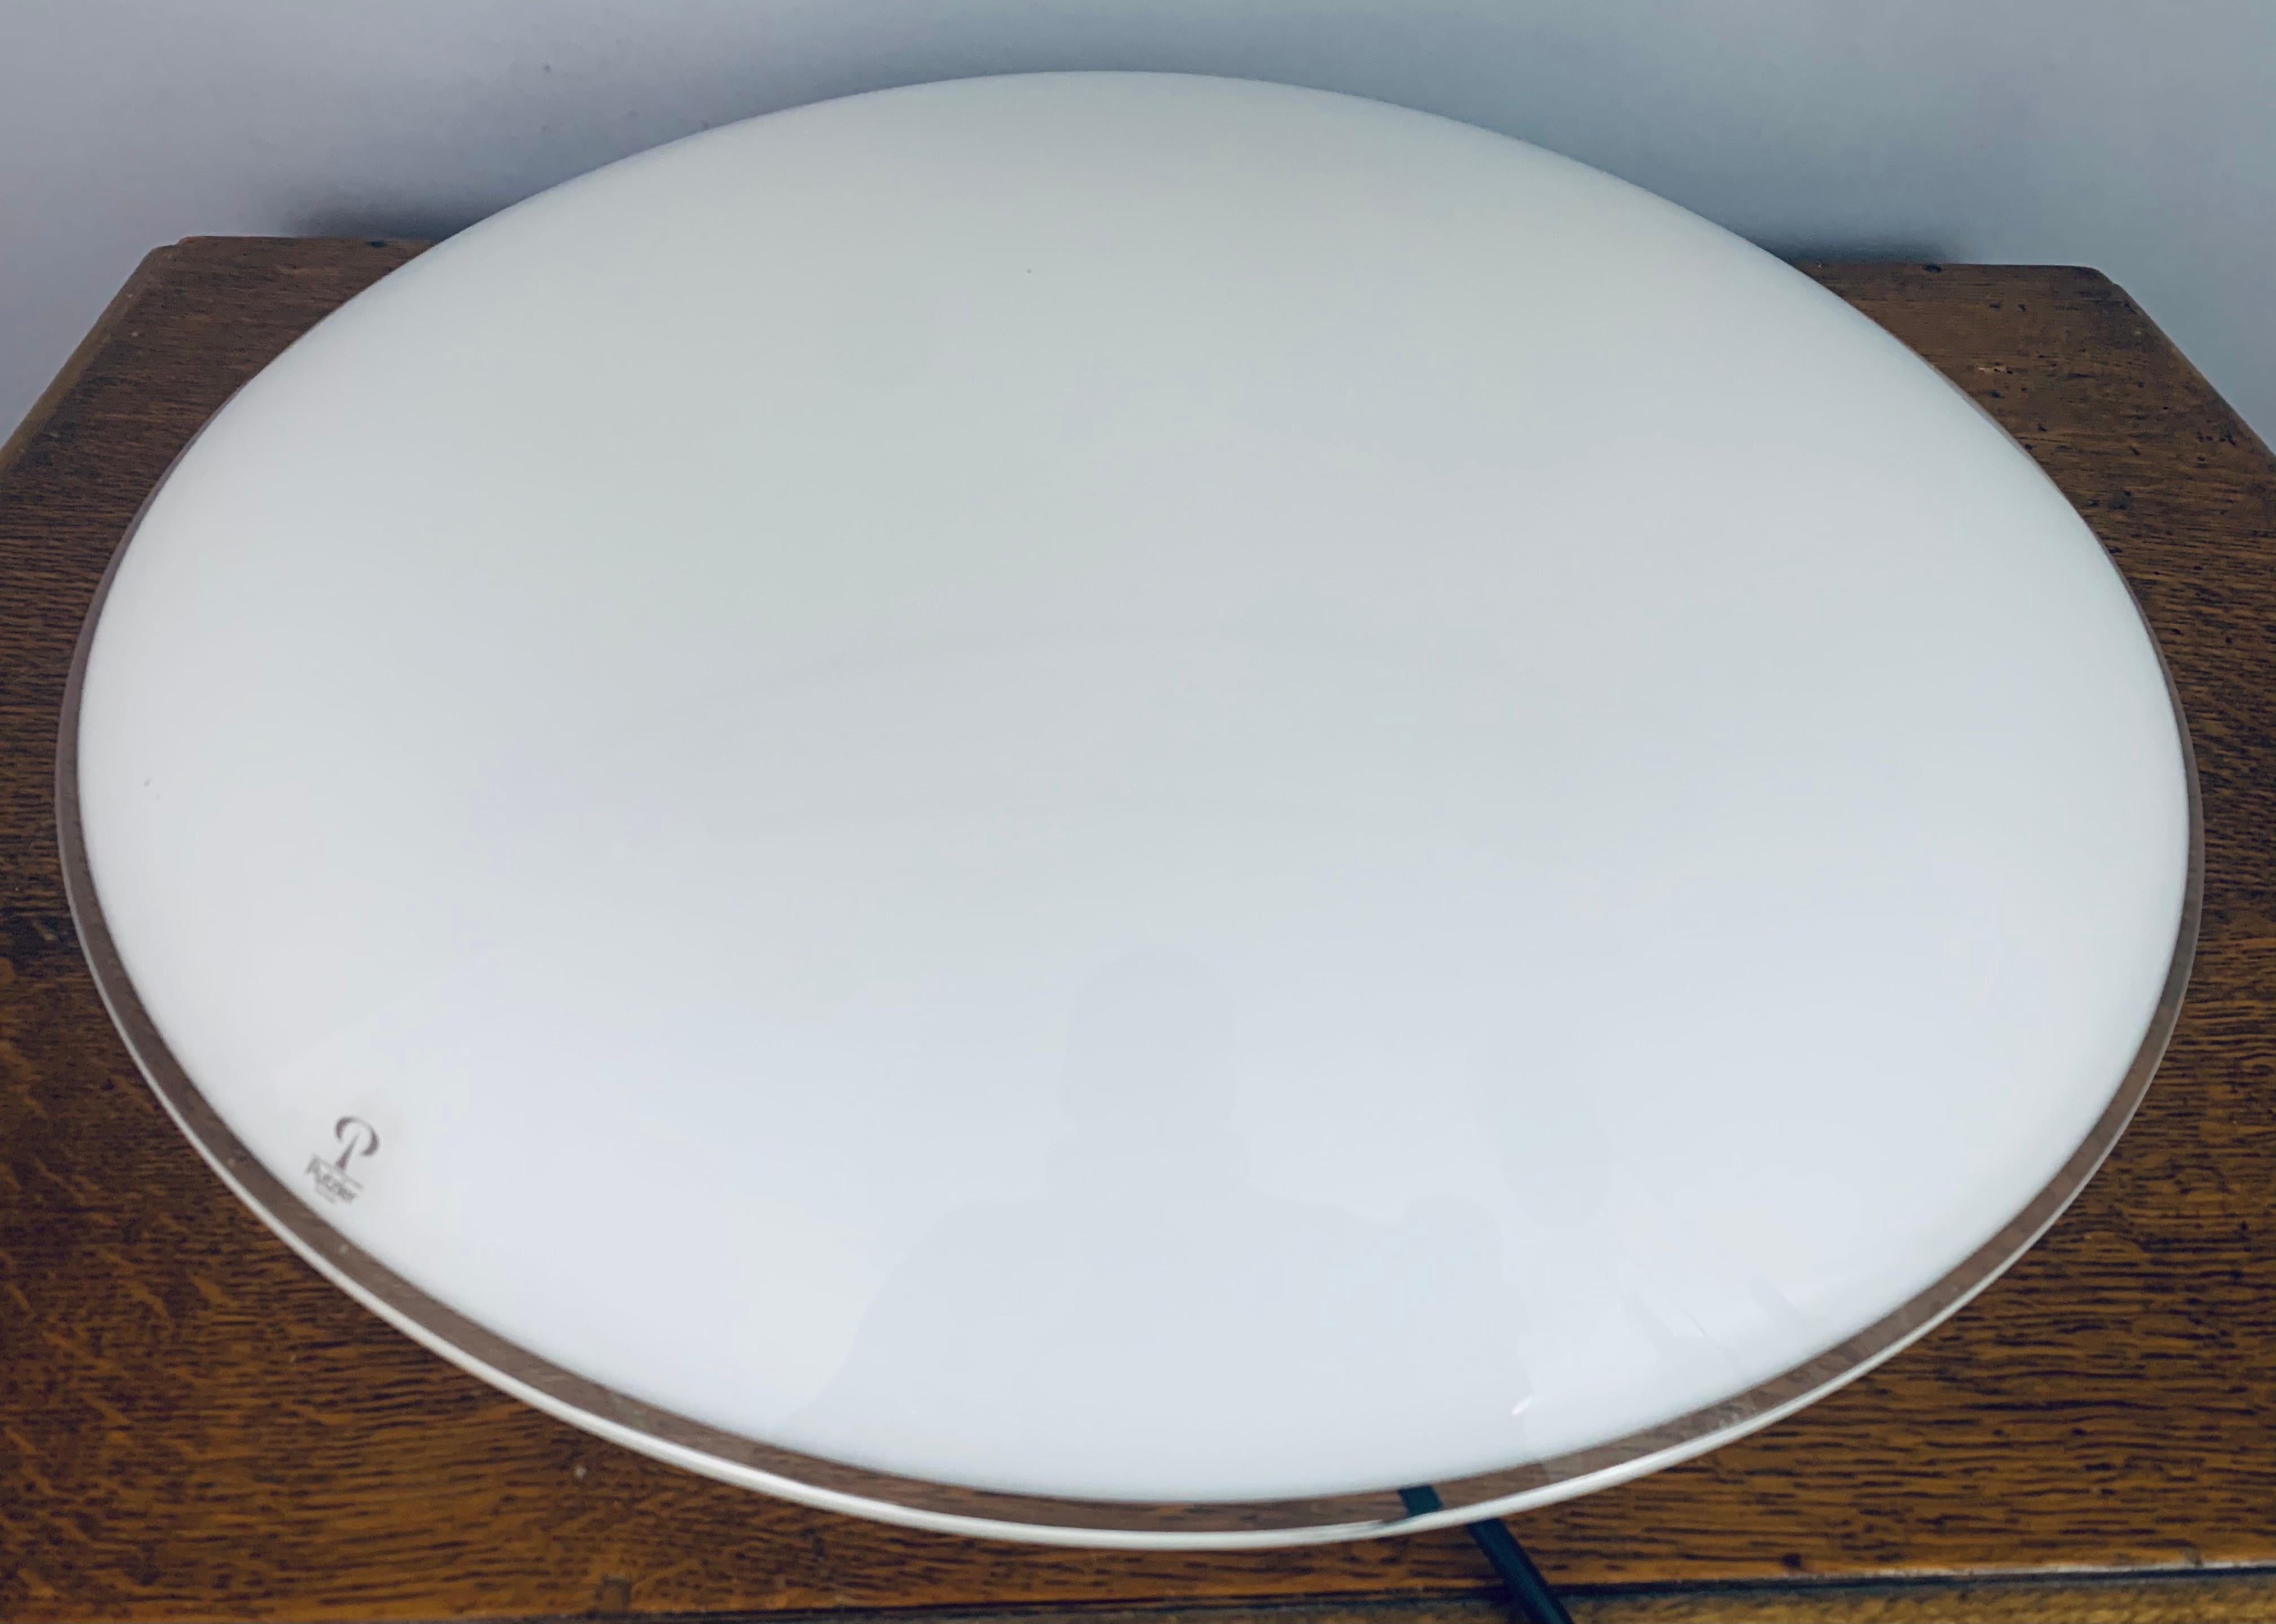 1970s German Peill & Putzler opaline 'flying saucer' wall light or ceiling flush mount.  The white opaline glass is encased with clear glass which is particularly visible around the outside edge.  Three screws hold the glass shade onto the white